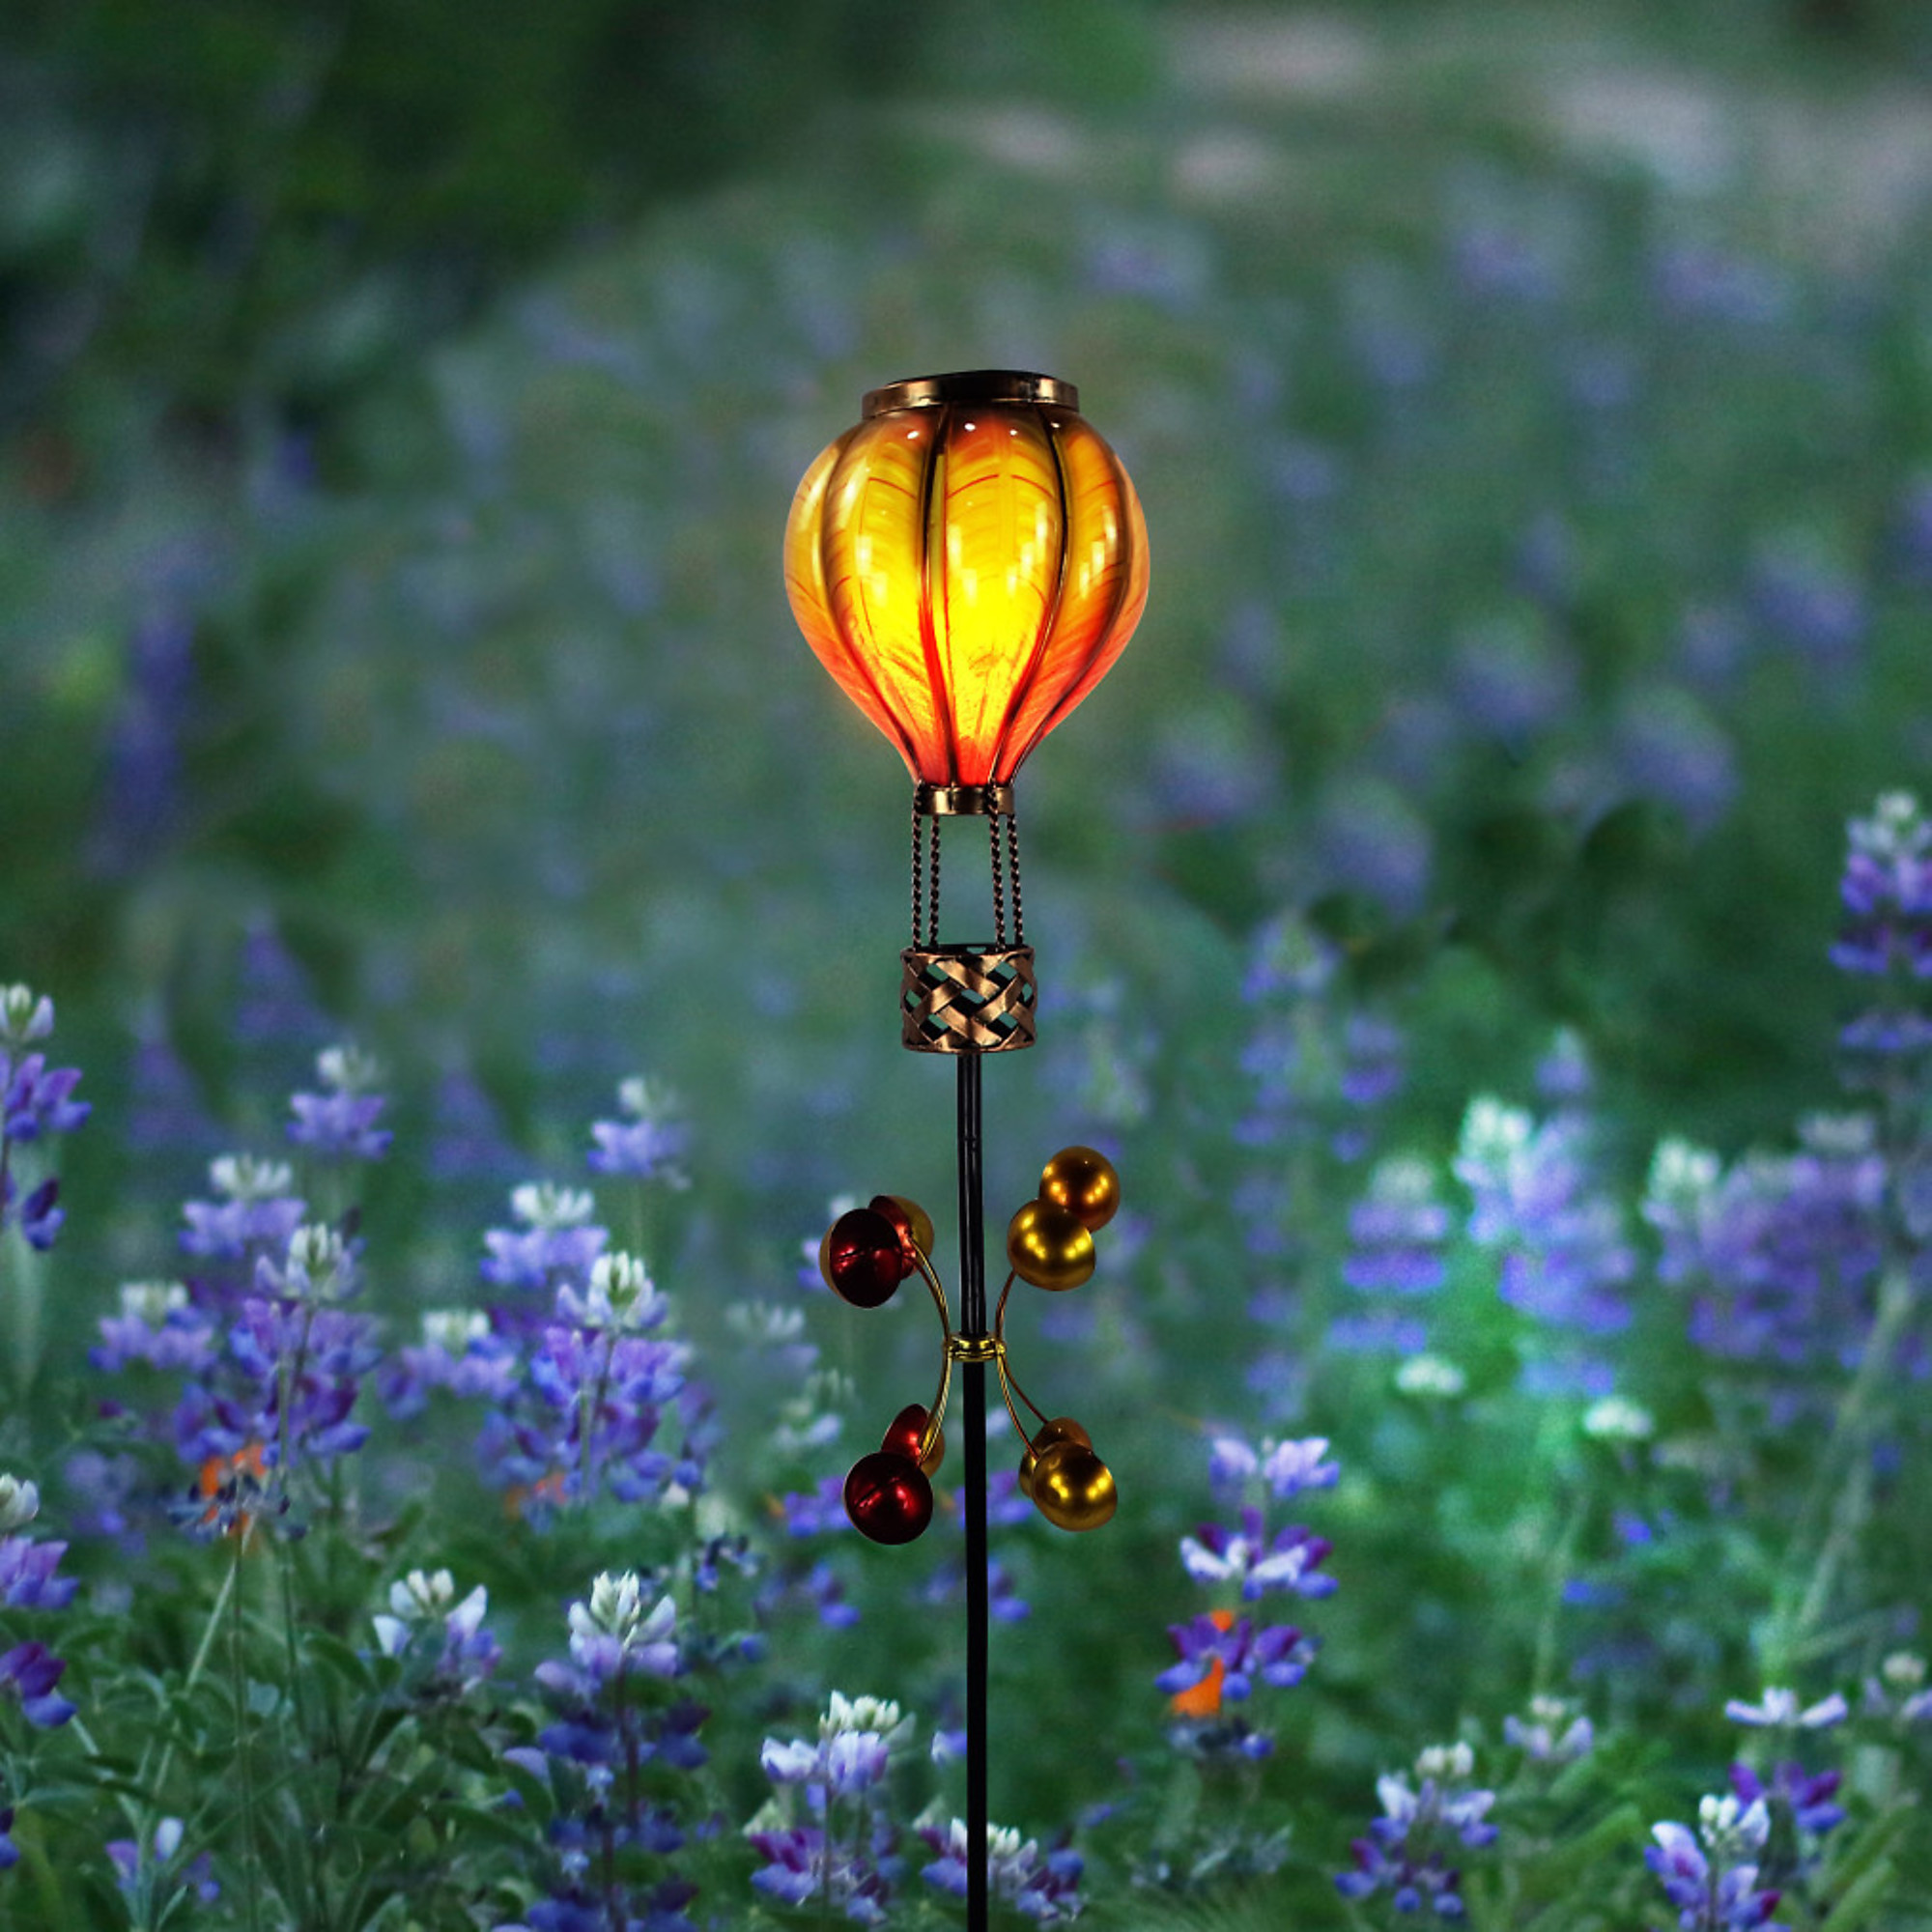 Alpine Corporation, Solar Hot Air Balloon Spinning Garden Stake w/ LED, Color Multi, Watts 0 Included (qty.) 1 Model RGG1004SLR